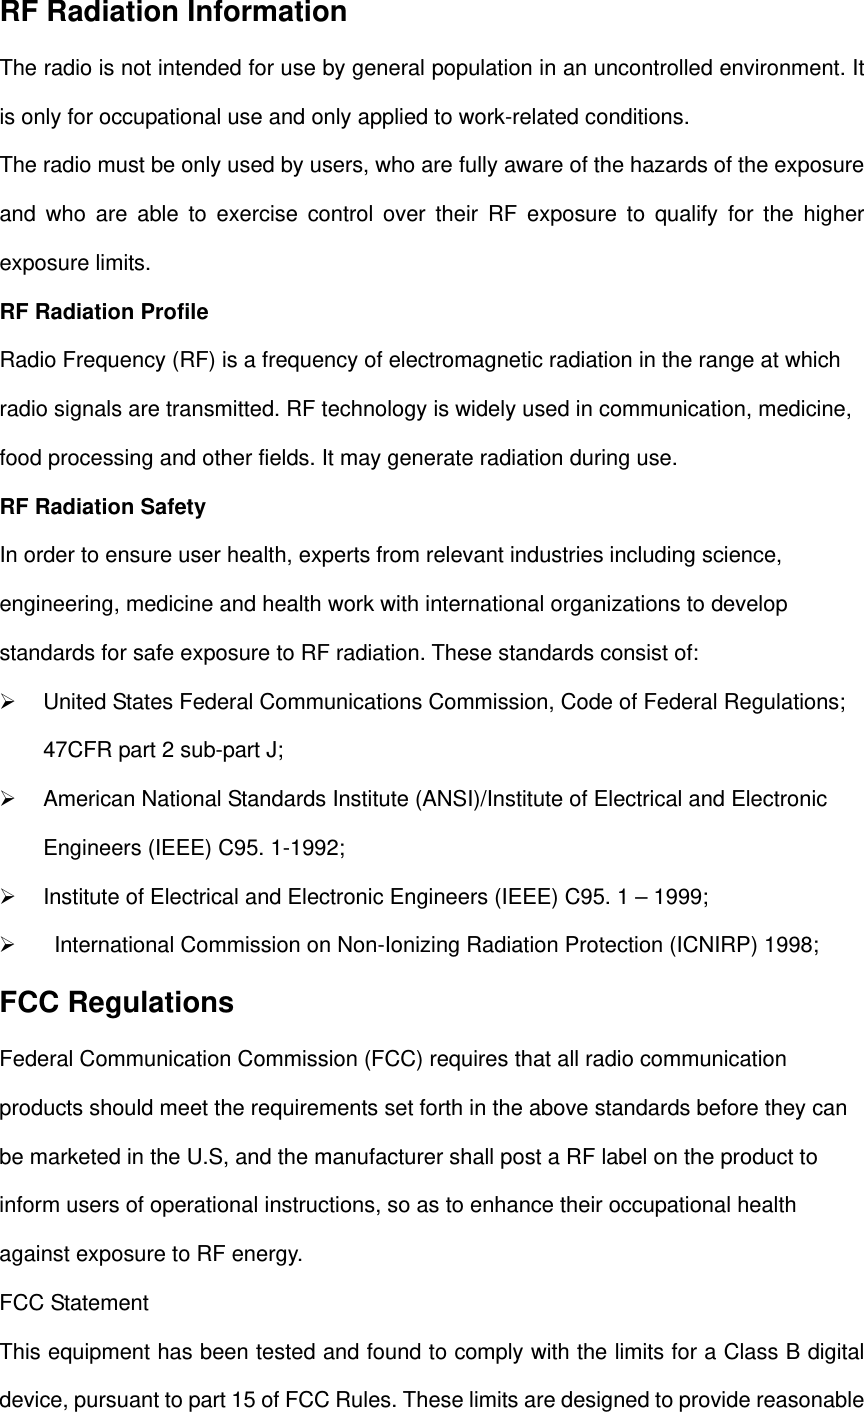 RF Radiation Information The radio is not intended for use by general population in an uncontrolled environment. It is only for occupational use and only applied to work-related conditions. The radio must be only used by users, who are fully aware of the hazards of the exposure and who are able to exercise control over their RF exposure to qualify for the higher exposure limits. RF Radiation Profile Radio Frequency (RF) is a frequency of electromagnetic radiation in the range at which radio signals are transmitted. RF technology is widely used in communication, medicine, food processing and other fields. It may generate radiation during use.   RF Radiation Safety In order to ensure user health, experts from relevant industries including science, engineering, medicine and health work with international organizations to develop standards for safe exposure to RF radiation. These standards consist of:     United States Federal Communications Commission, Code of Federal Regulations; 47CFR part 2 sub-part J;     American National Standards Institute (ANSI)/Institute of Electrical and Electronic Engineers (IEEE) C95. 1-1992;     Institute of Electrical and Electronic Engineers (IEEE) C95. 1 – 1999;       International Commission on Non-Ionizing Radiation Protection (ICNIRP) 1998; FCC Regulations Federal Communication Commission (FCC) requires that all radio communication products should meet the requirements set forth in the above standards before they can be marketed in the U.S, and the manufacturer shall post a RF label on the product to inform users of operational instructions, so as to enhance their occupational health against exposure to RF energy.   FCC Statement This equipment has been tested and found to comply with the limits for a Class B digital device, pursuant to part 15 of FCC Rules. These limits are designed to provide reasonable 